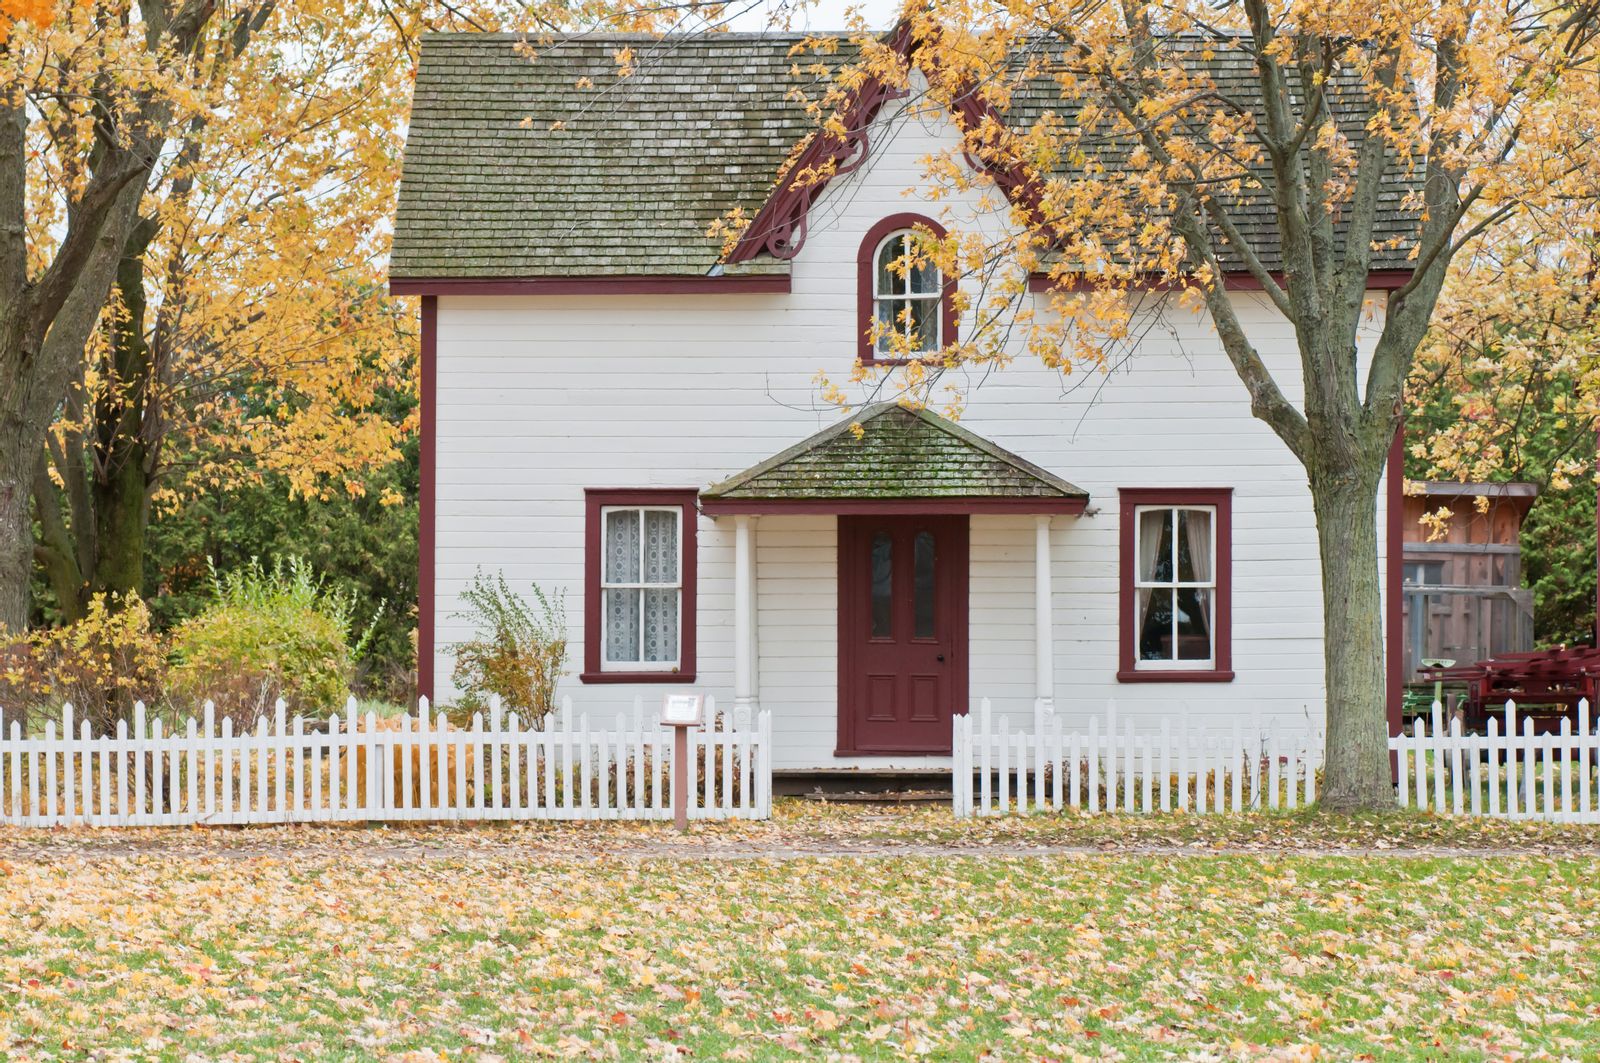 Don’t forget any of your home maintenance for the fall!